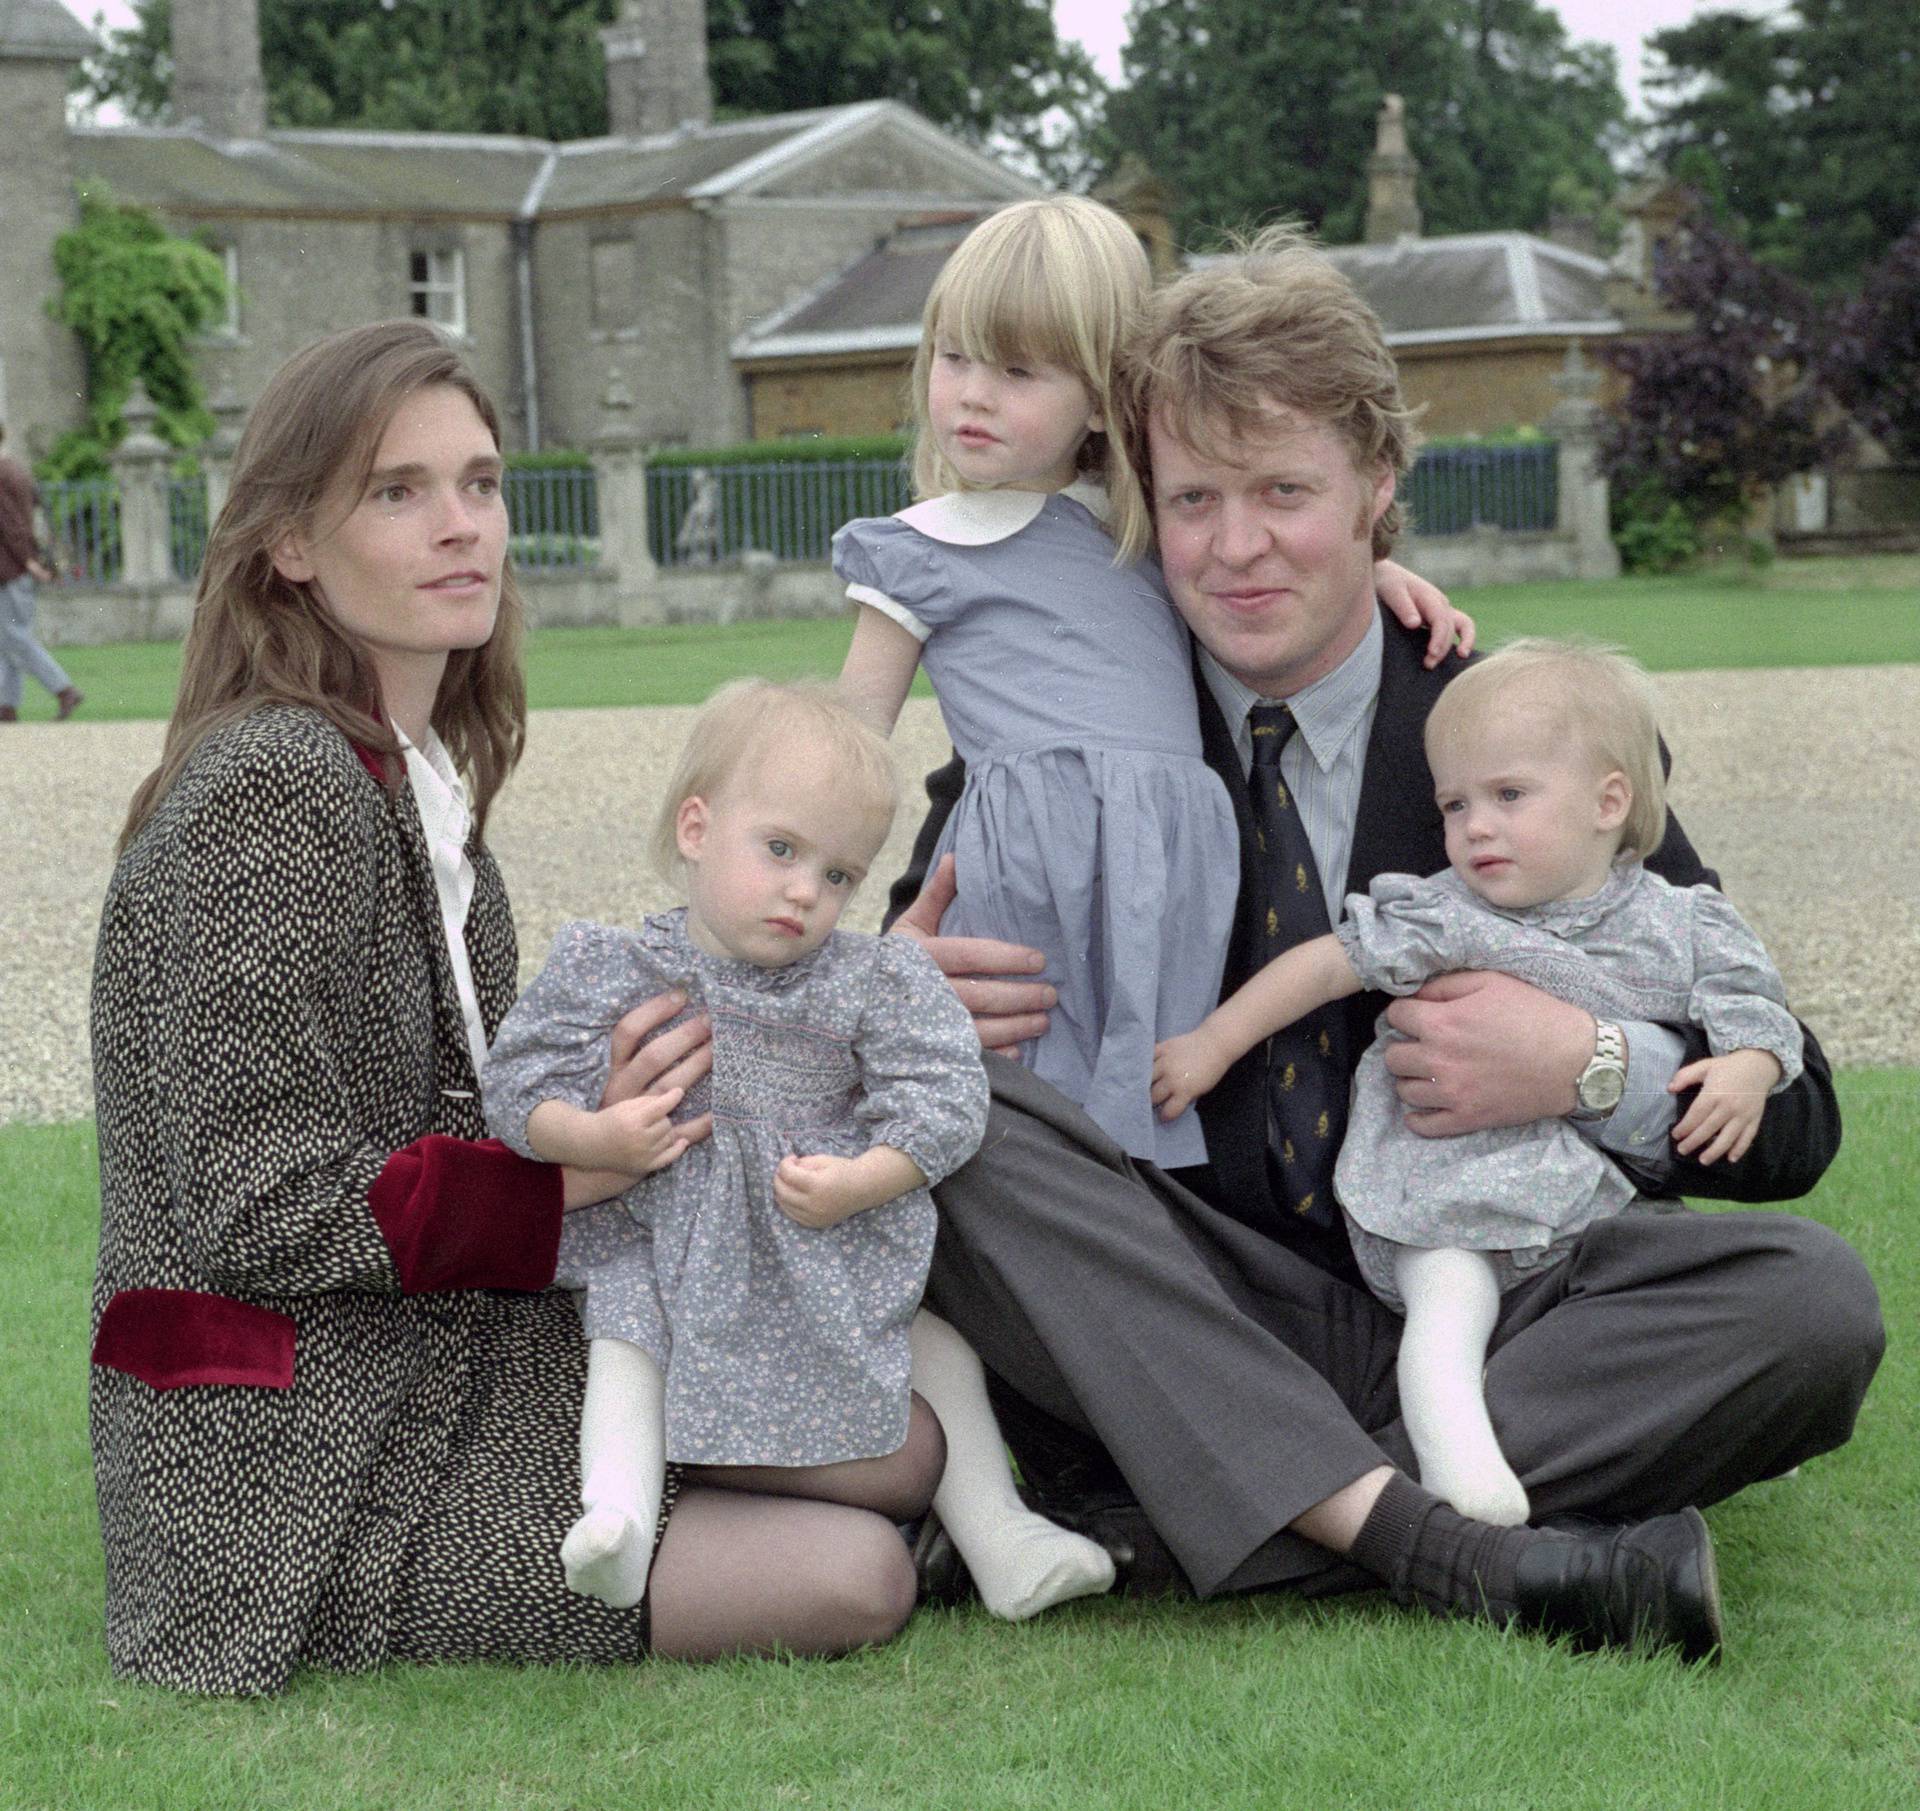 Charles Edward Maurice Spencer, 9th Earl Spencer, pictured with his first wife Victoria Lockwood and their three children, Althorp Hall, Northamptonshire, UK - 18 Jul 1993